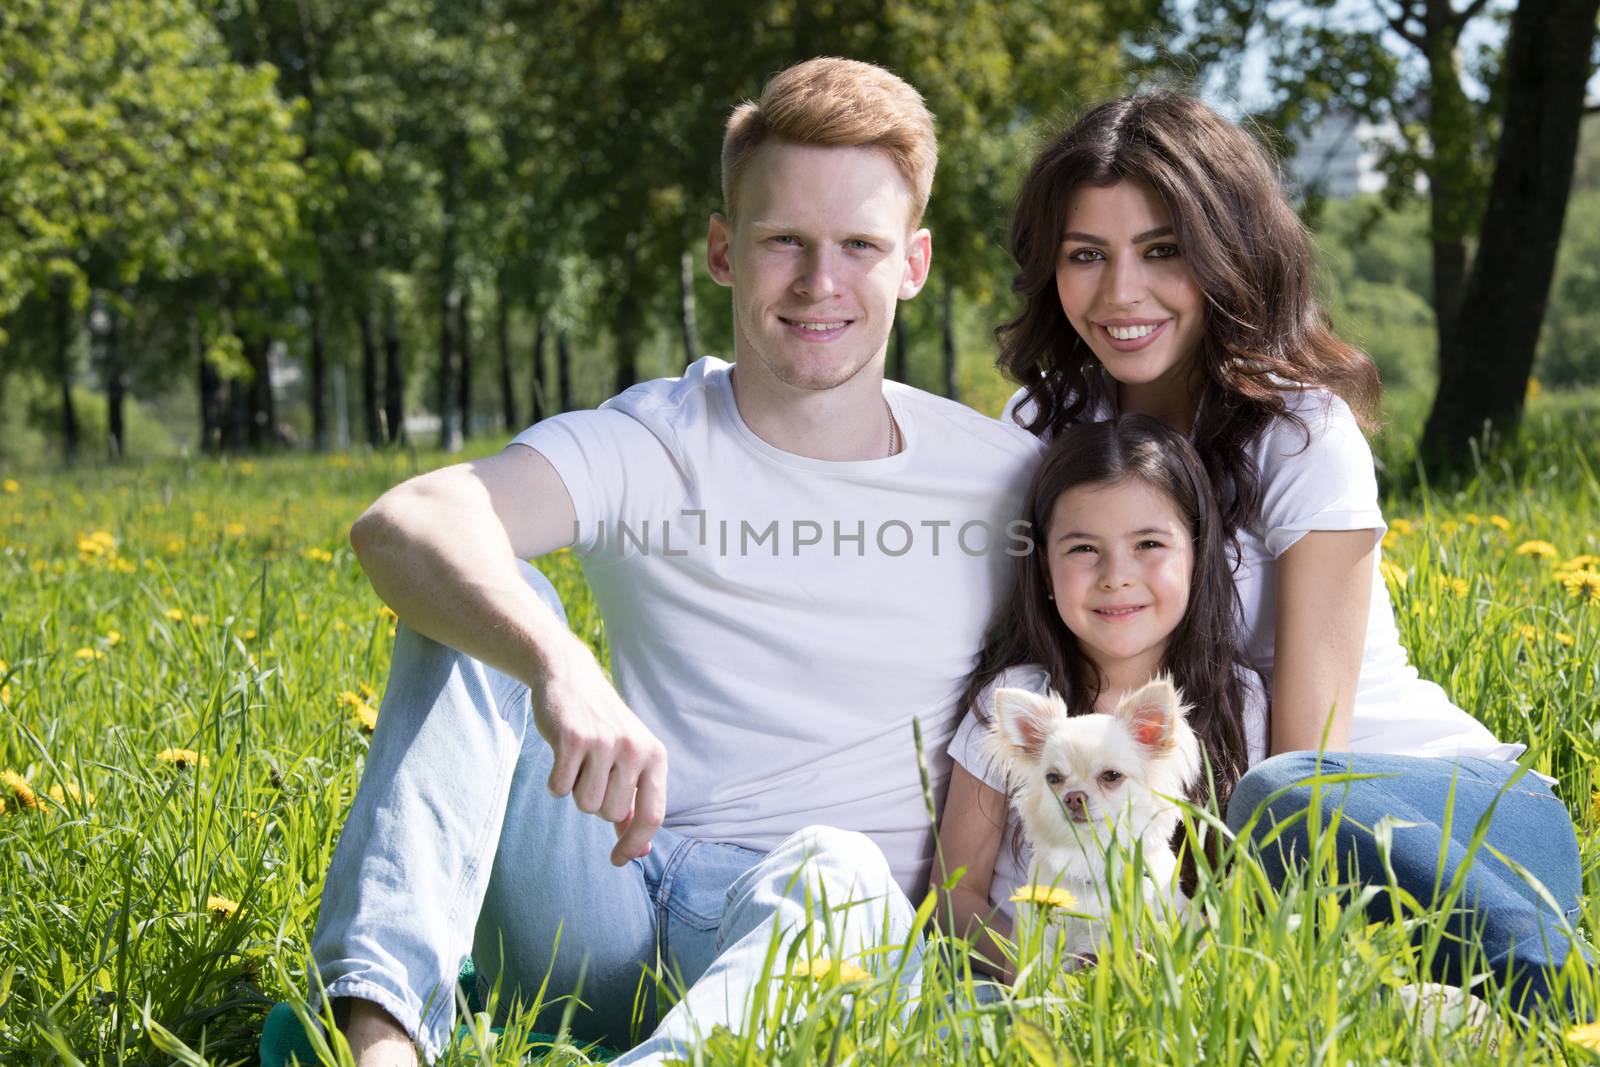 Happy family with man, woman and child sitting on grass in city park